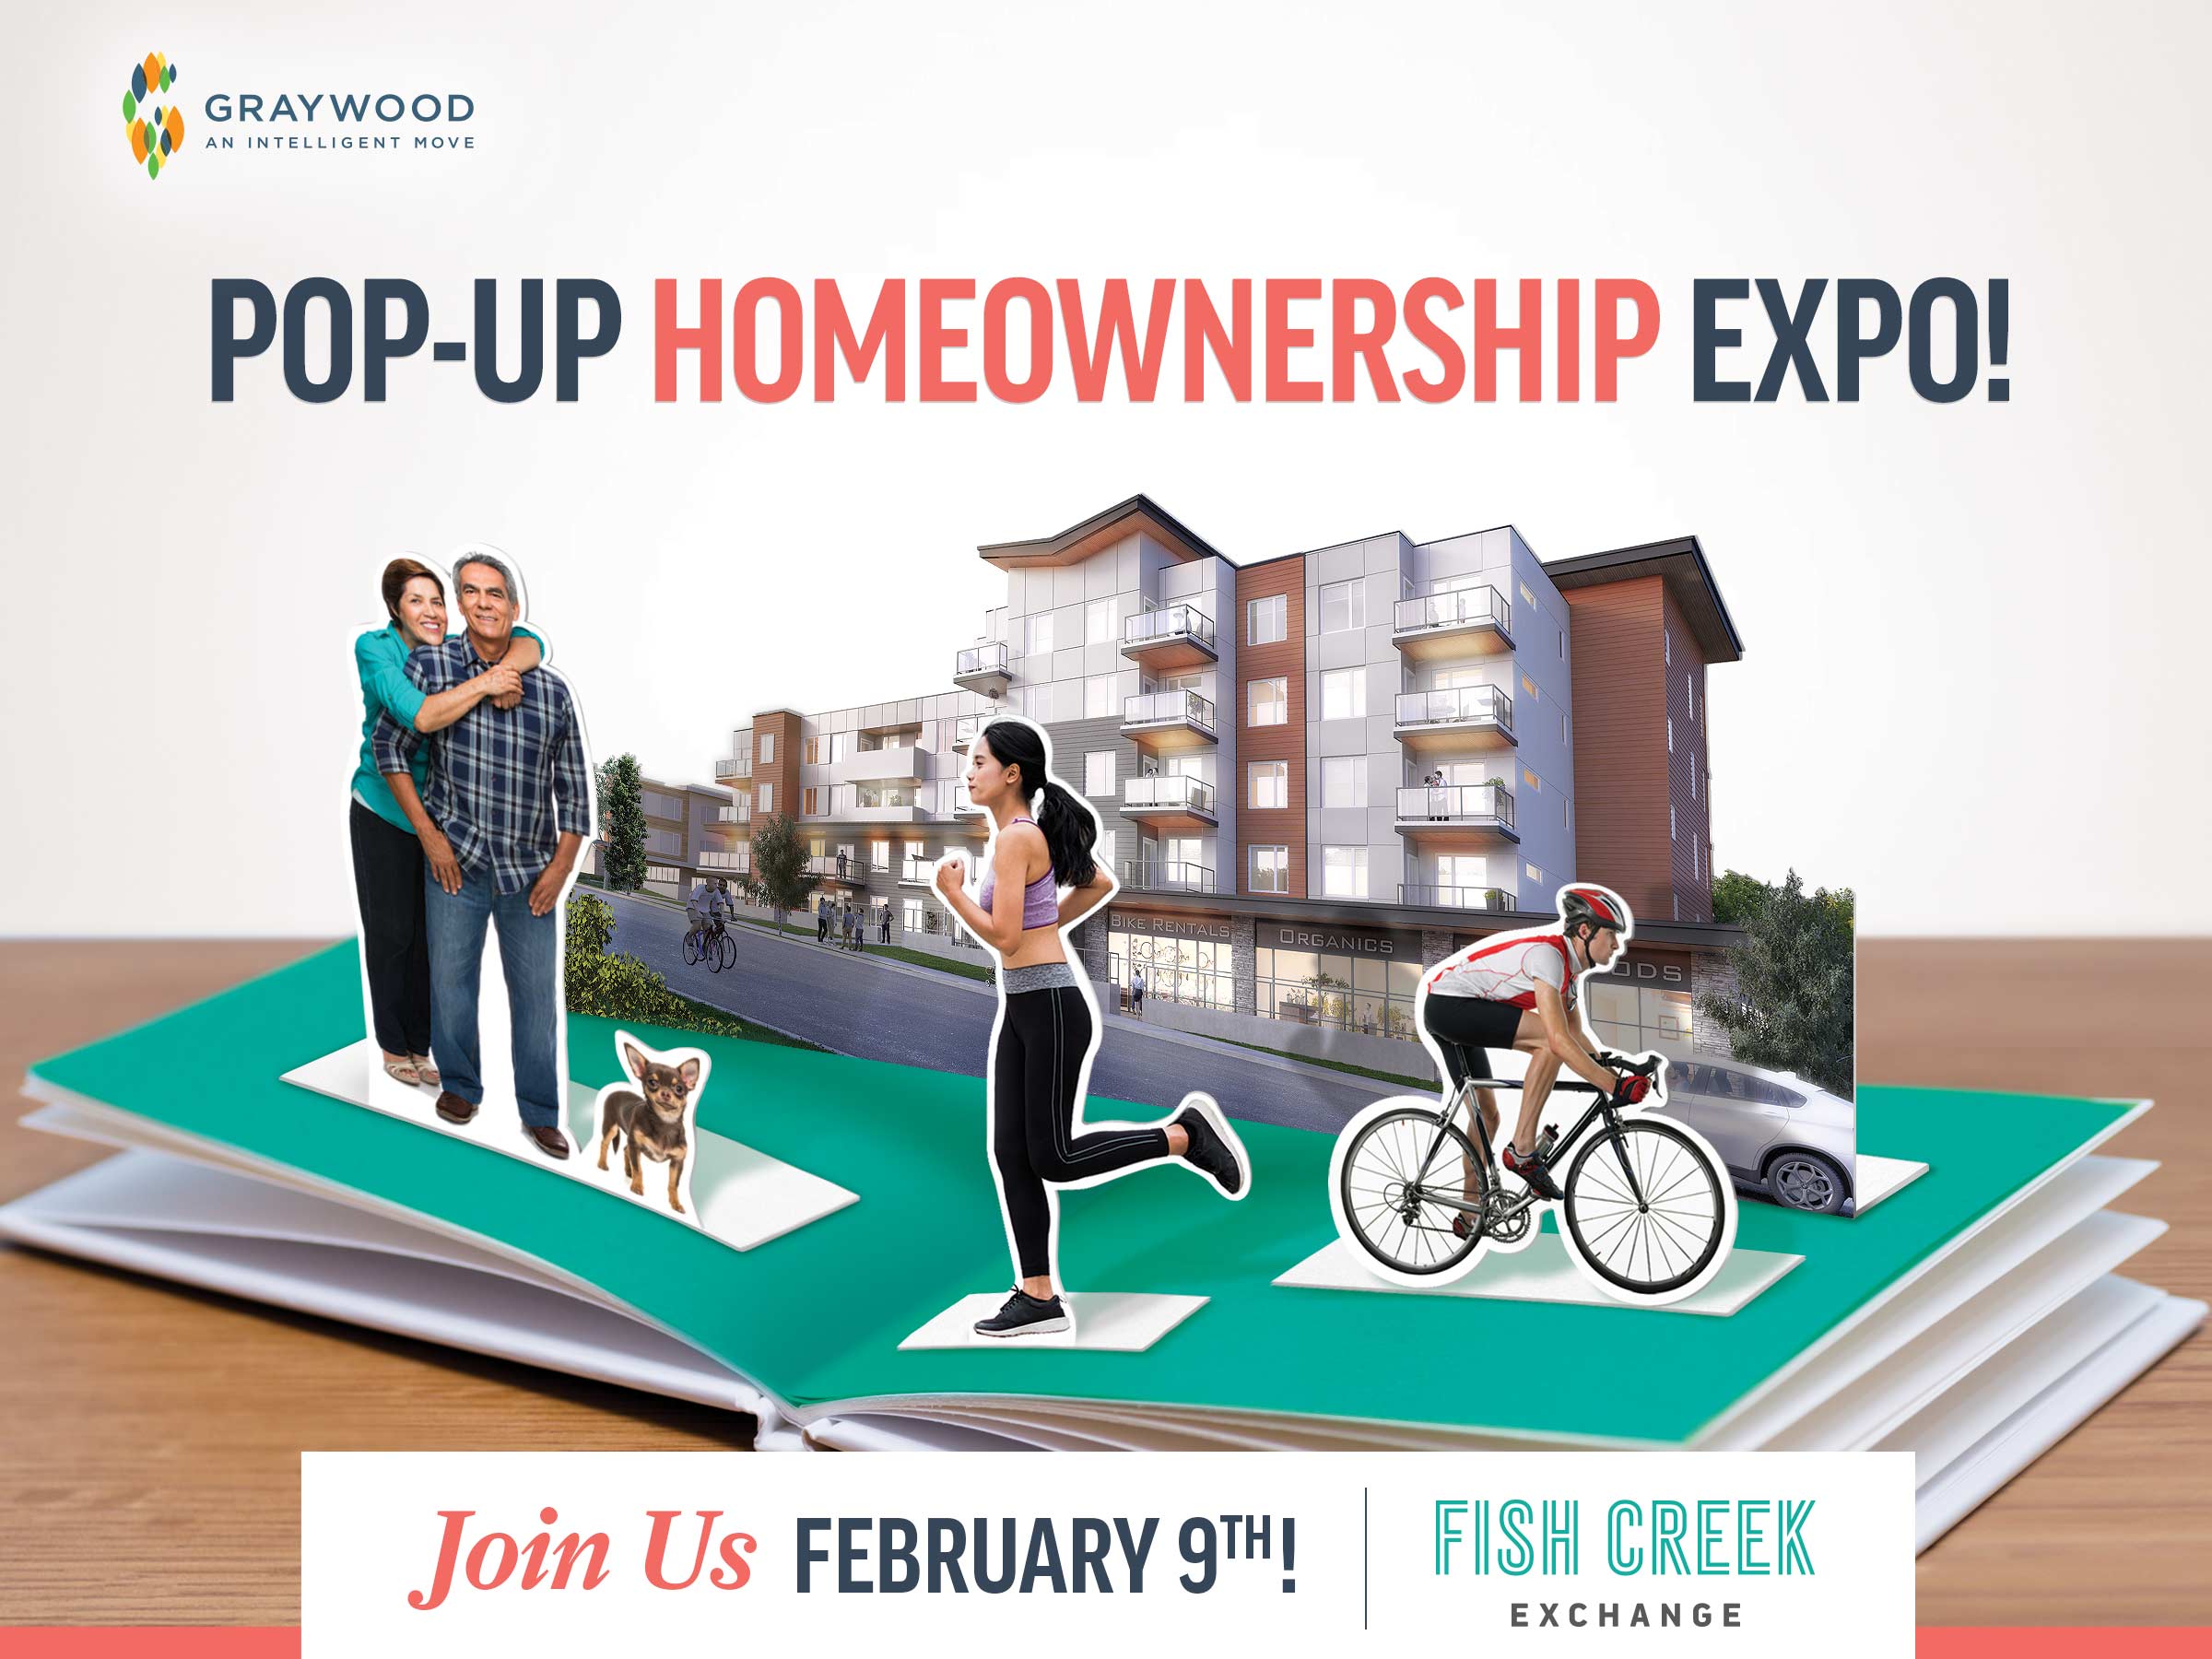 Invitation to attend a Calgary Pop-up Homeownership Expo at Fish Creek Exchange